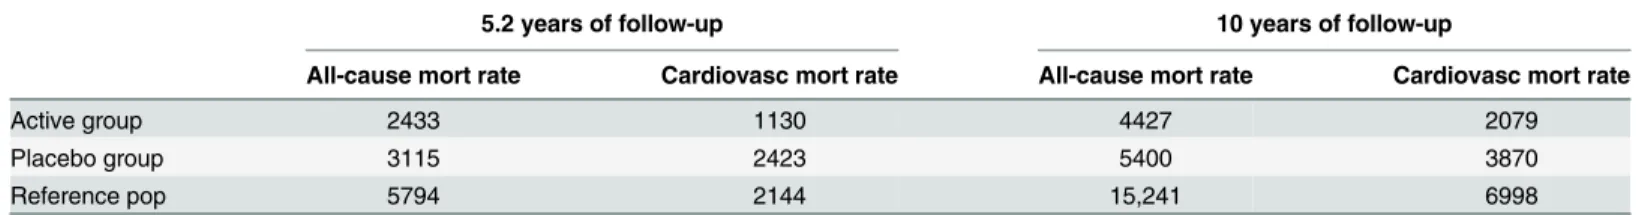 Table 4. Mortality rate in the active treatment group compared to the placebo group, and to official mortality statistics.